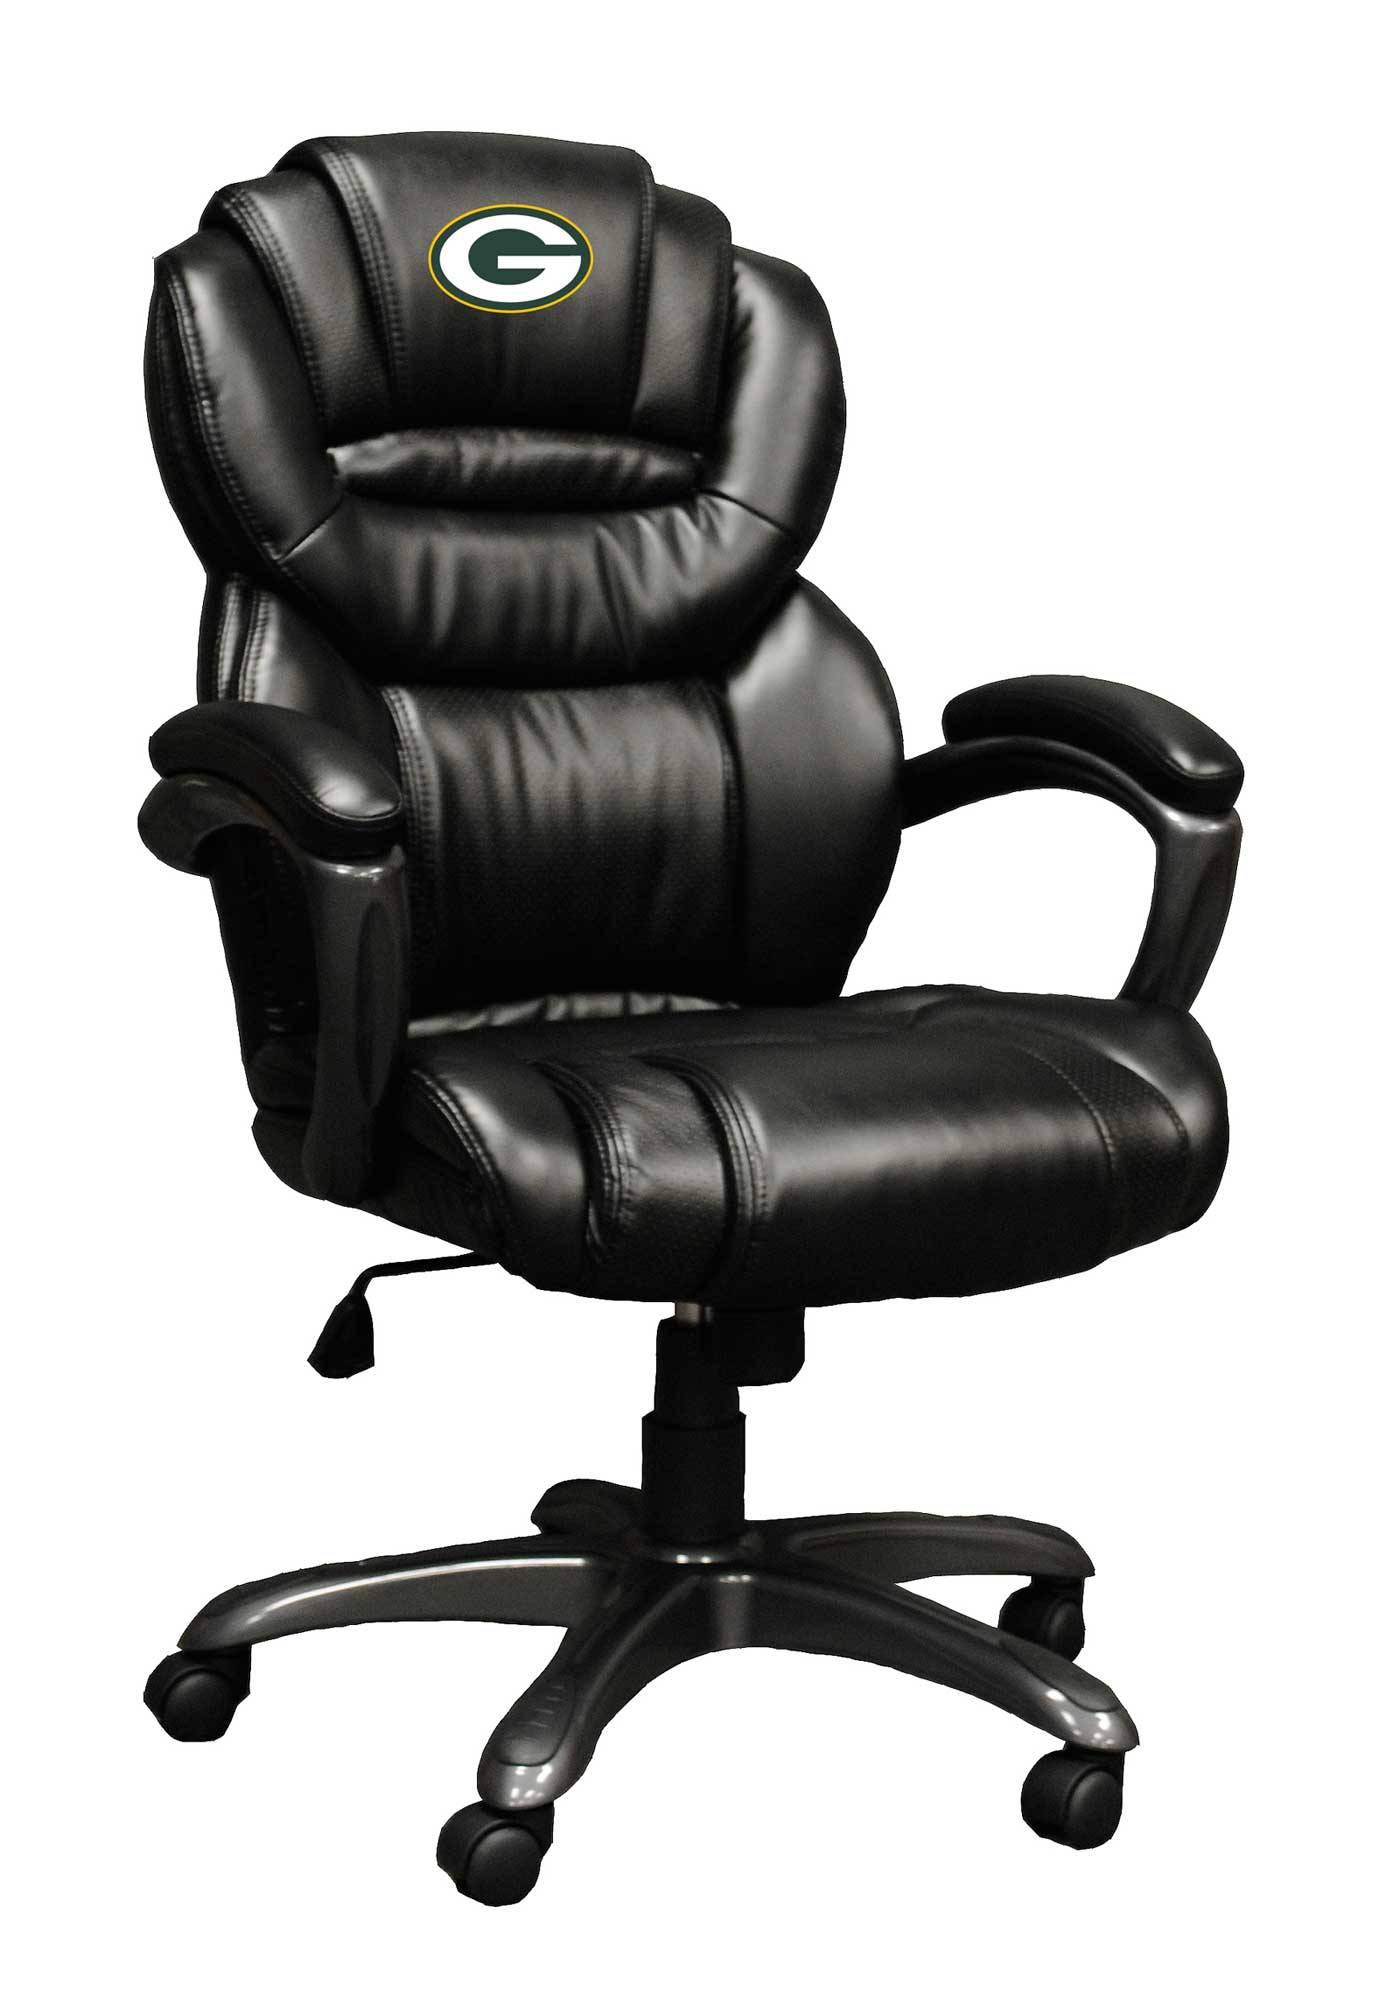 staples gaming chair